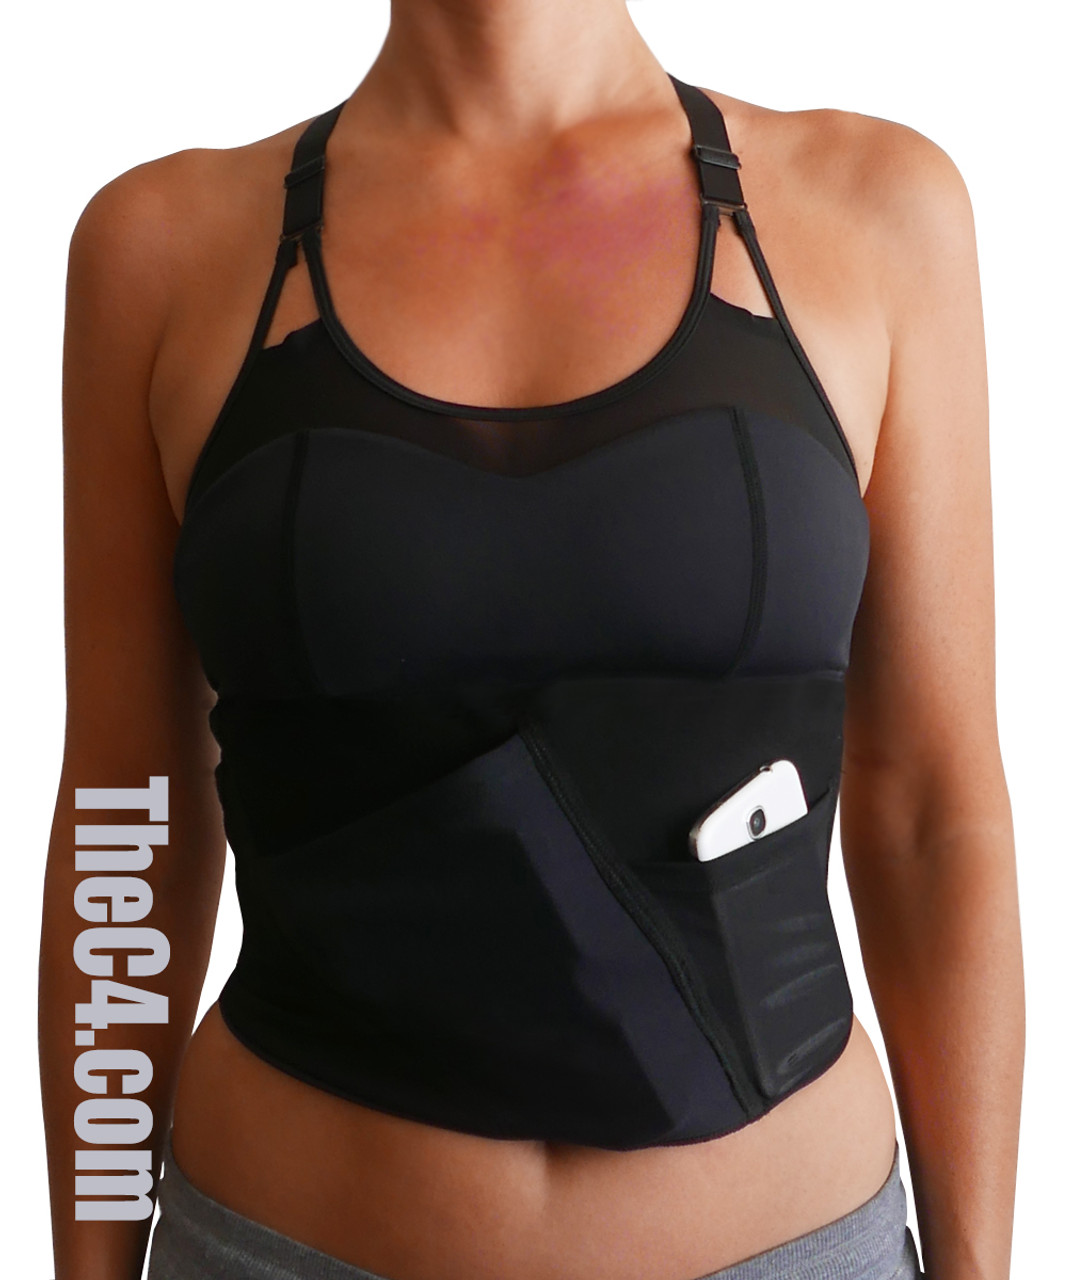  Lilcreek Sports Bra Holsters for Concealed Carry Women,Gun  Holster for Women Crop Tank Top,Conceal Carry for Women Shirt : Sports &  Outdoors